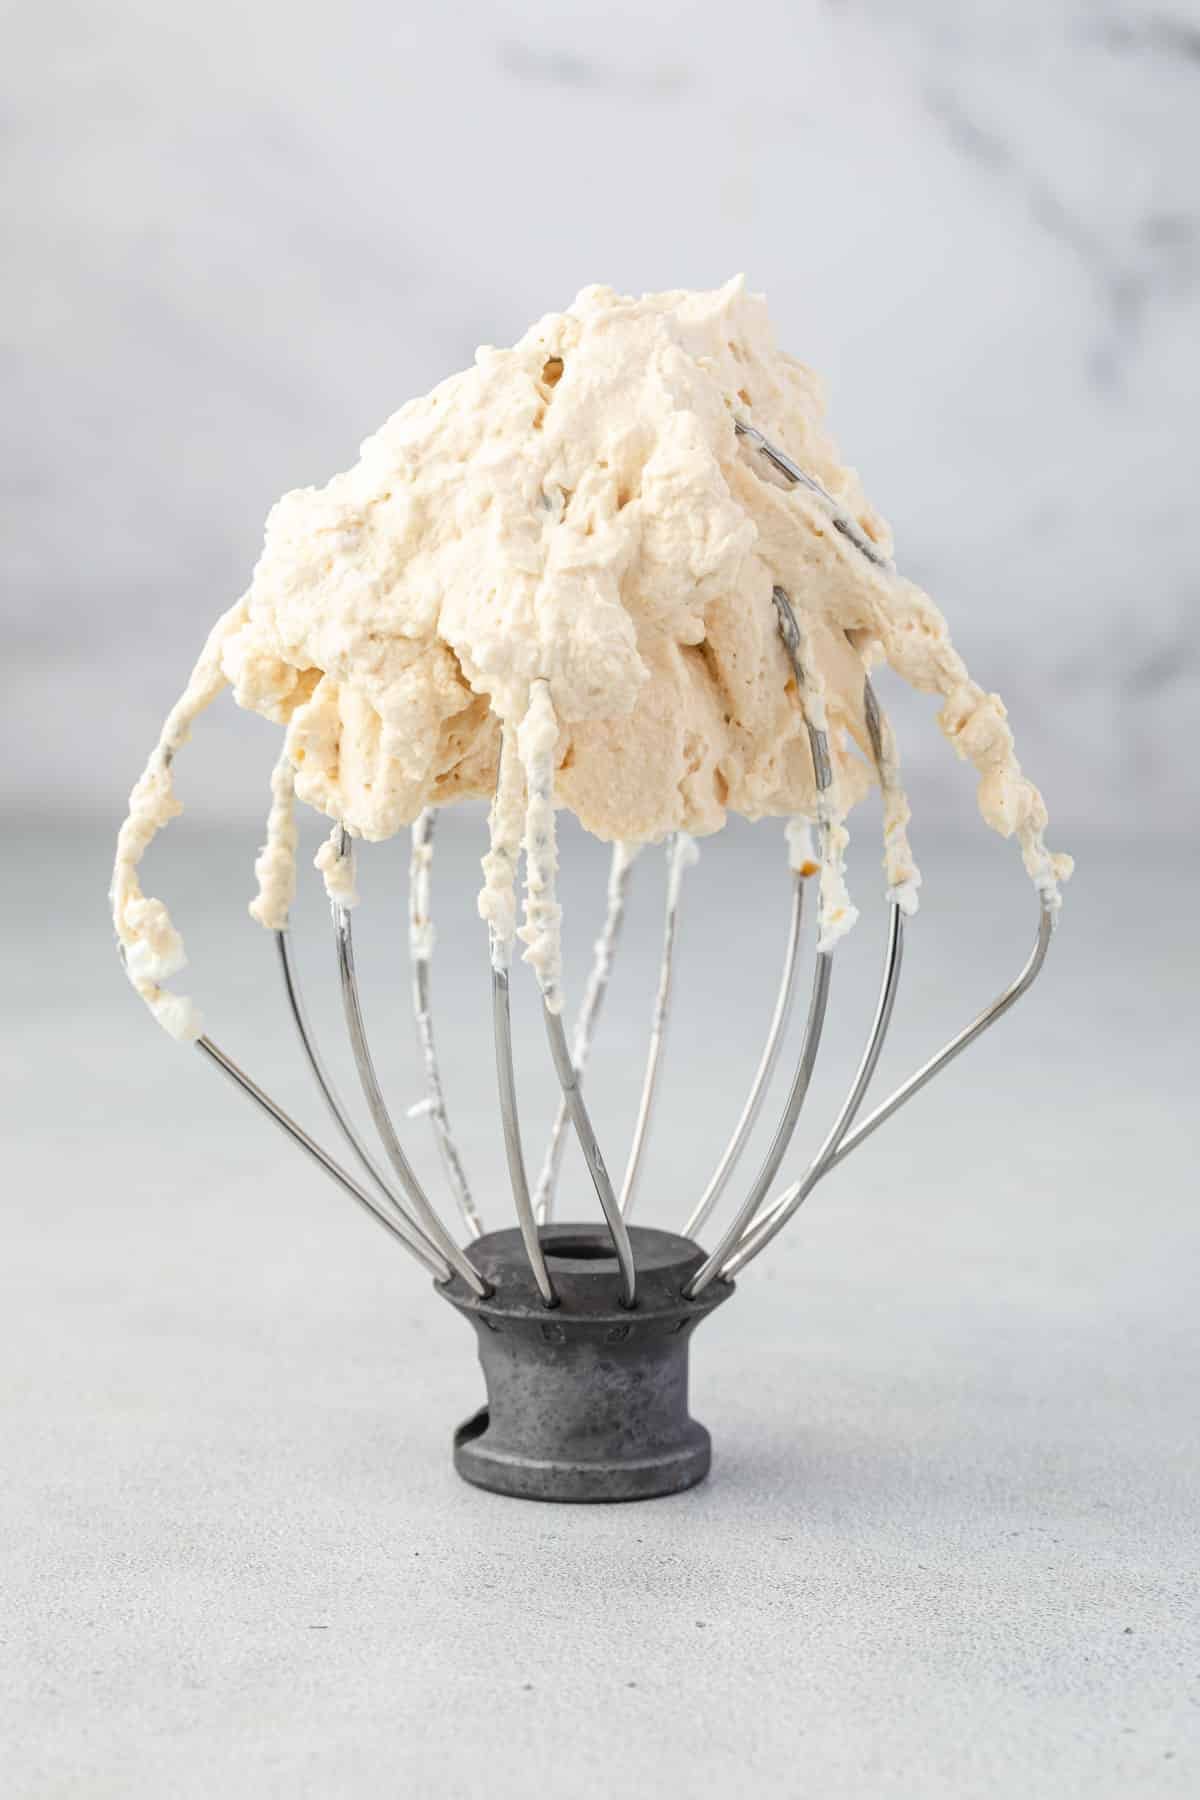 Caramel whipped cream on a whisk attachment standing up on the counter.